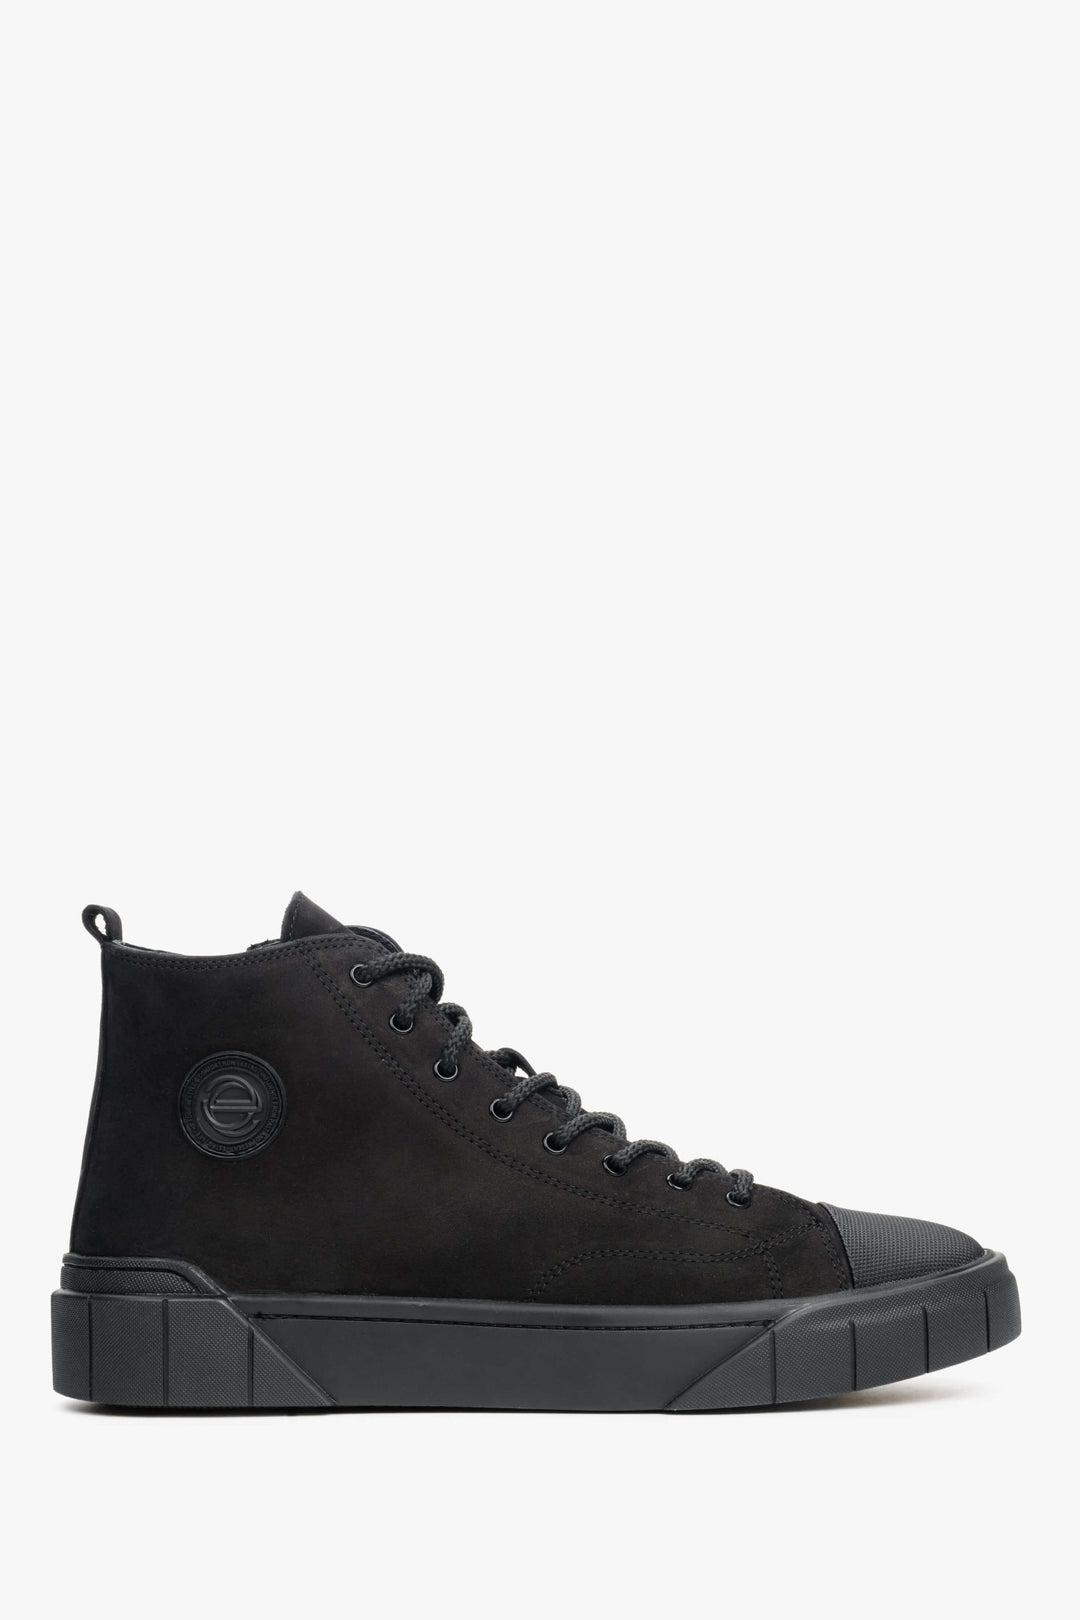 High-top men's lace-up sneakers in black by Estro - shoe profile.